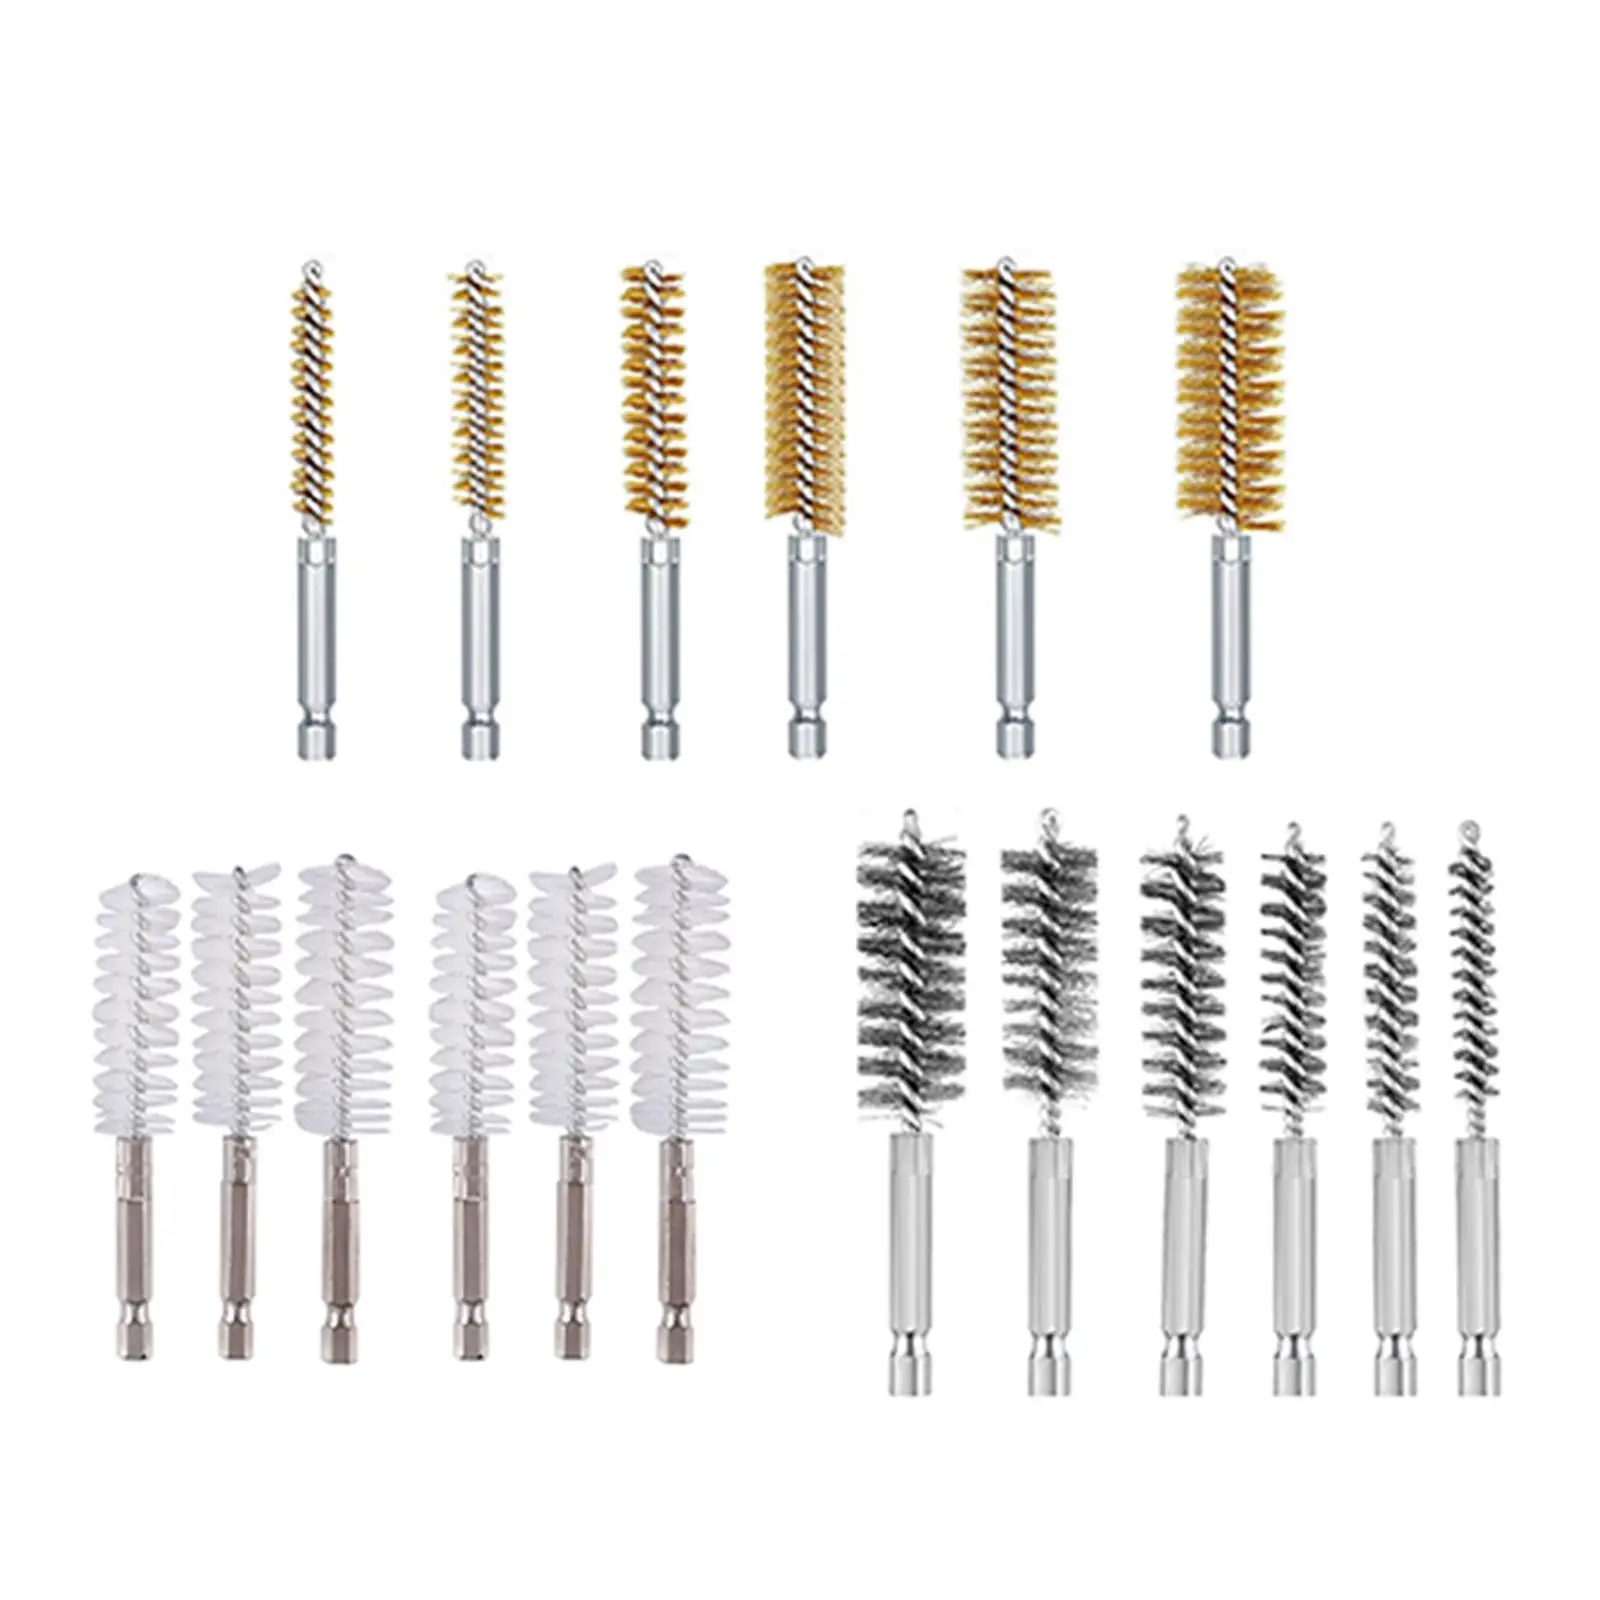 Tube Cleaning Wire Brush Washing Polishing Tools for Electric Drill Impact